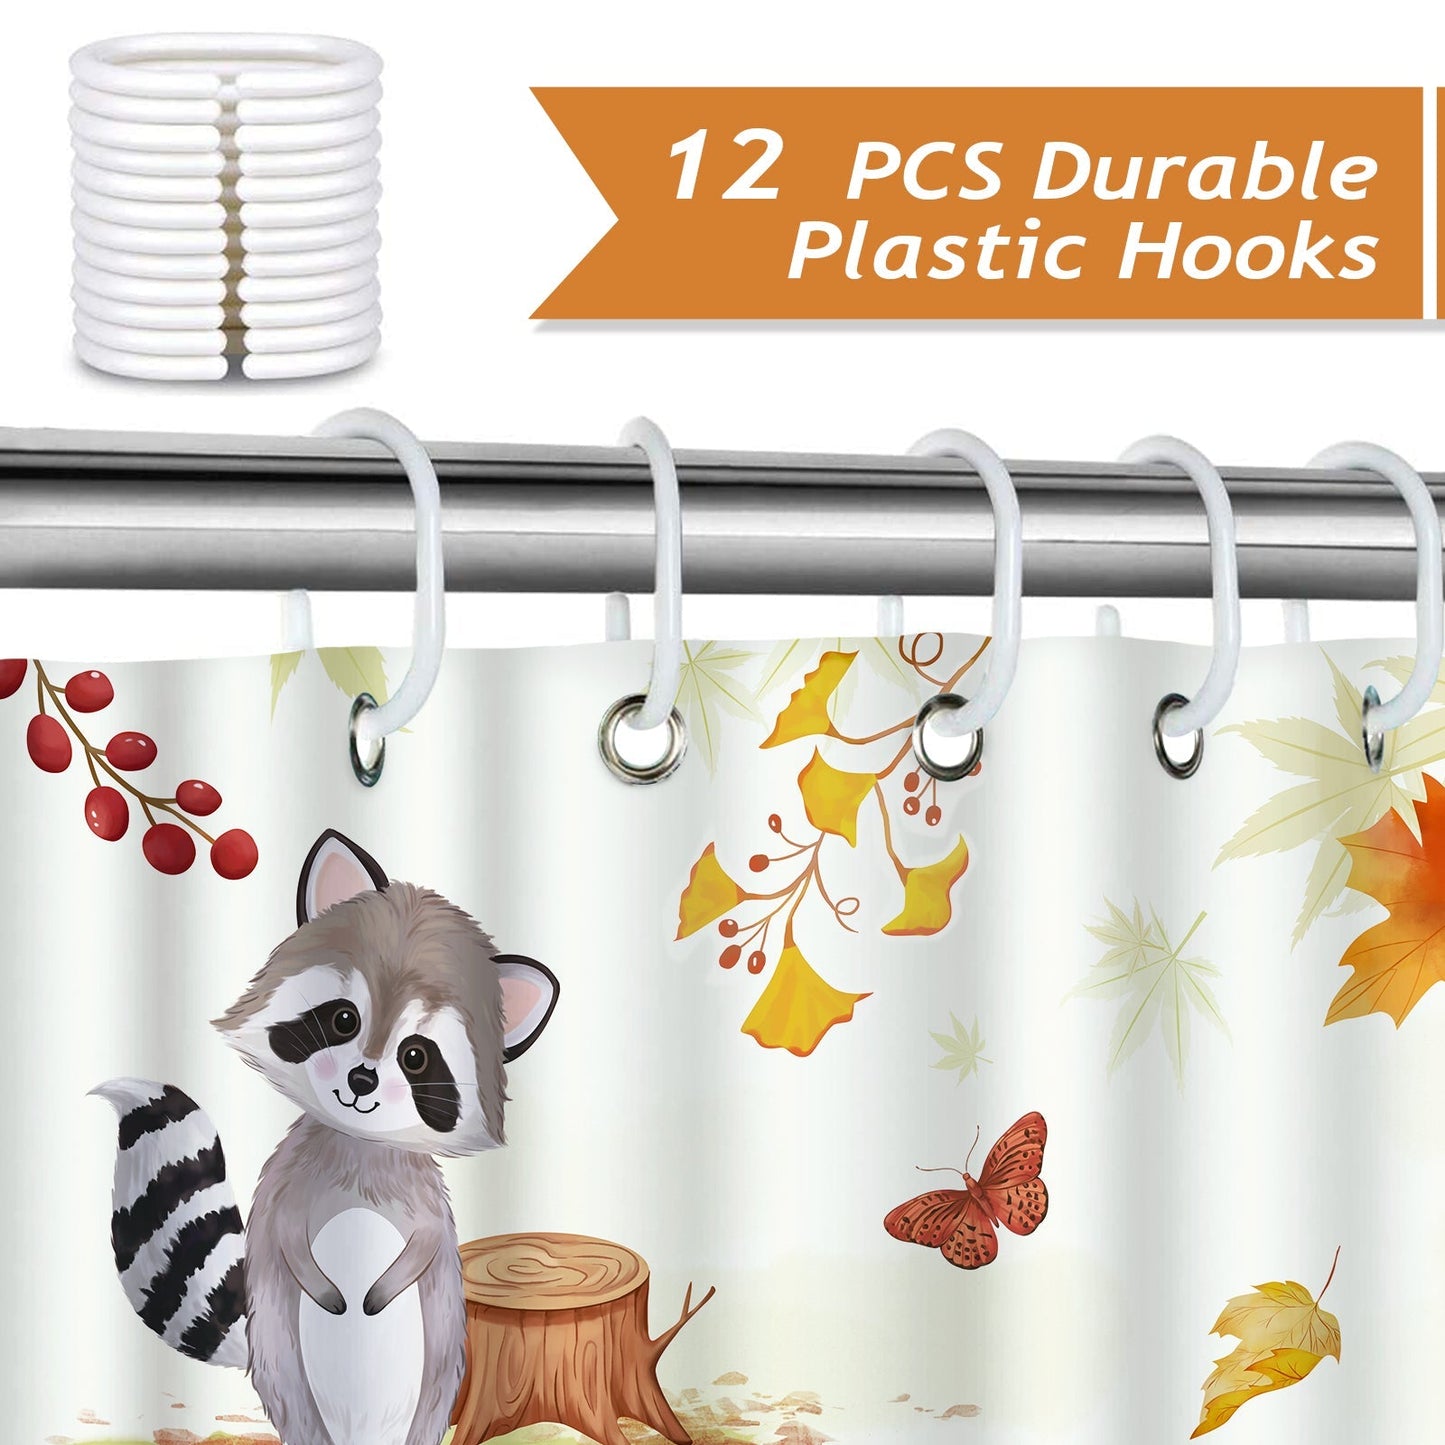 Fall Forest Animals Shower Curtain